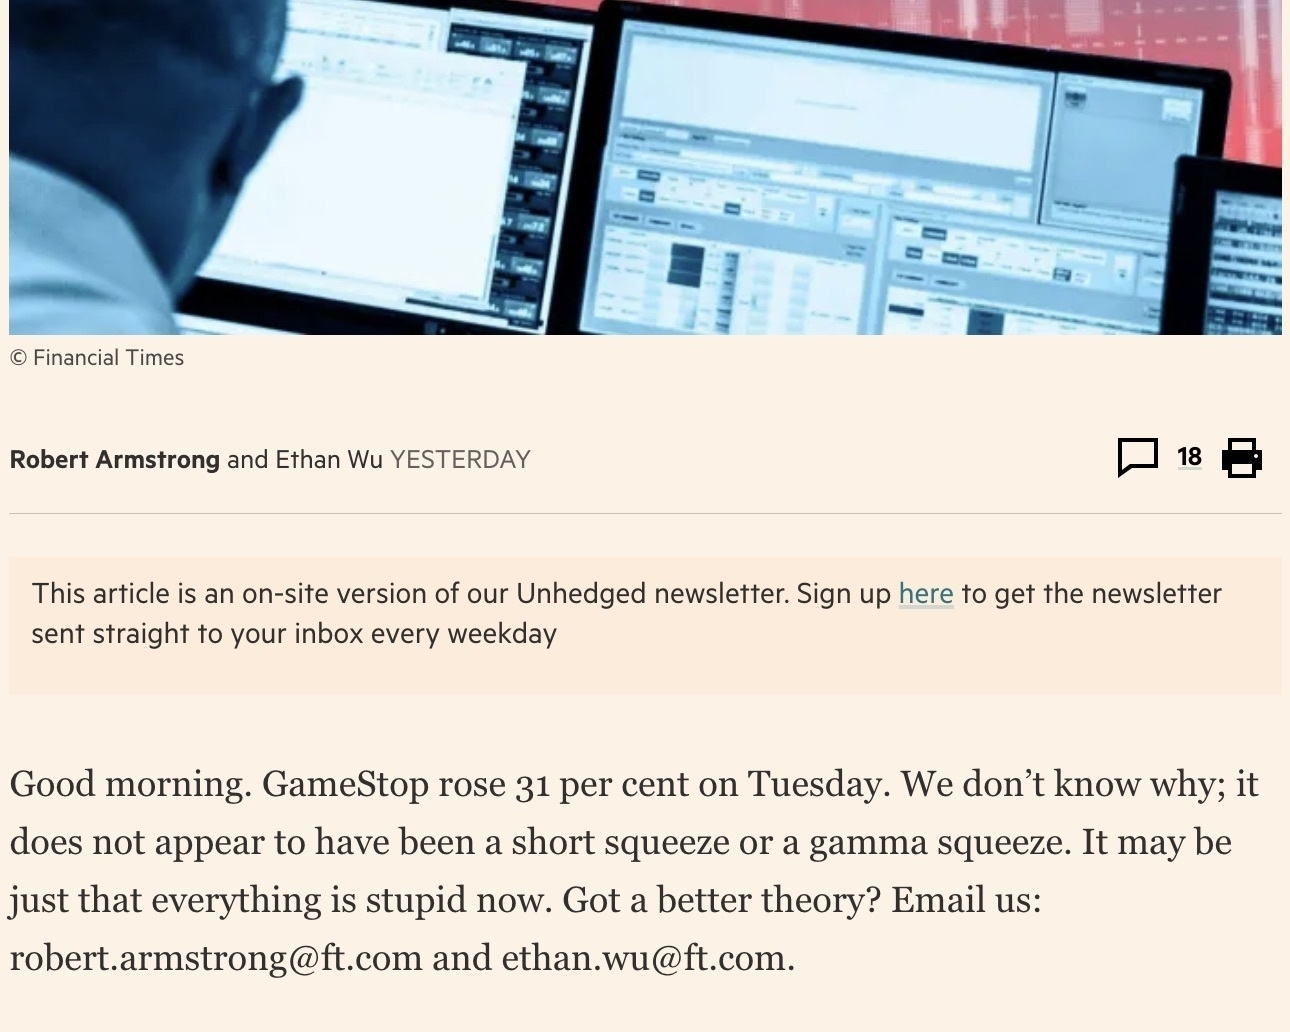 Good morning. GameStop rose 31 per cent on Tuesday. We don’t know why; it does not appear to have been a short squeeze or a gamma squeeze. It may be just that everything is stupid now. Got a better theory? Email us: robert.armstrong@ft.com and ethan.wu@ft.com.